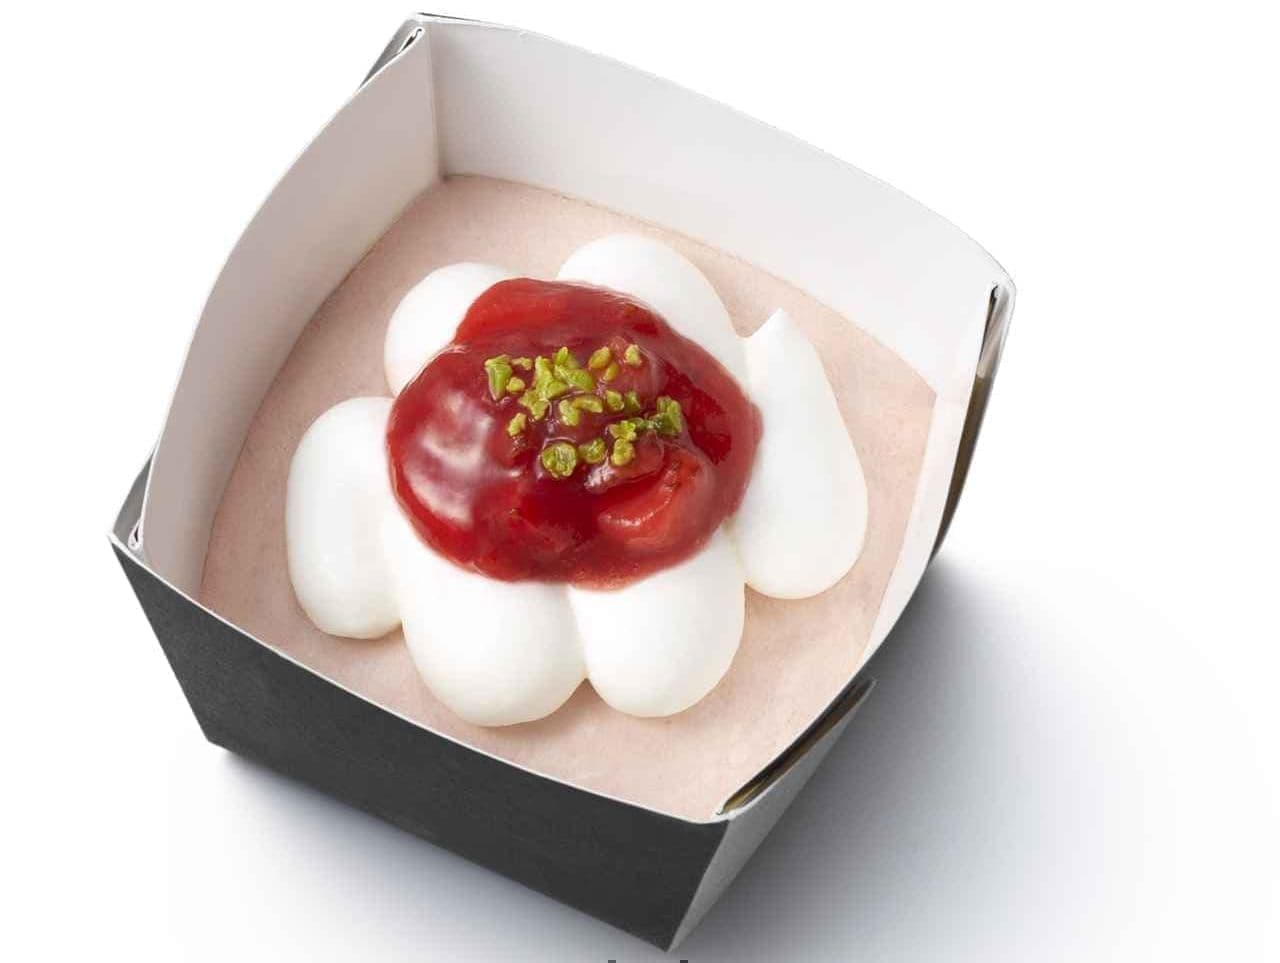 Mos "Chilly Dolce Cup Strawberry Mousse Cake